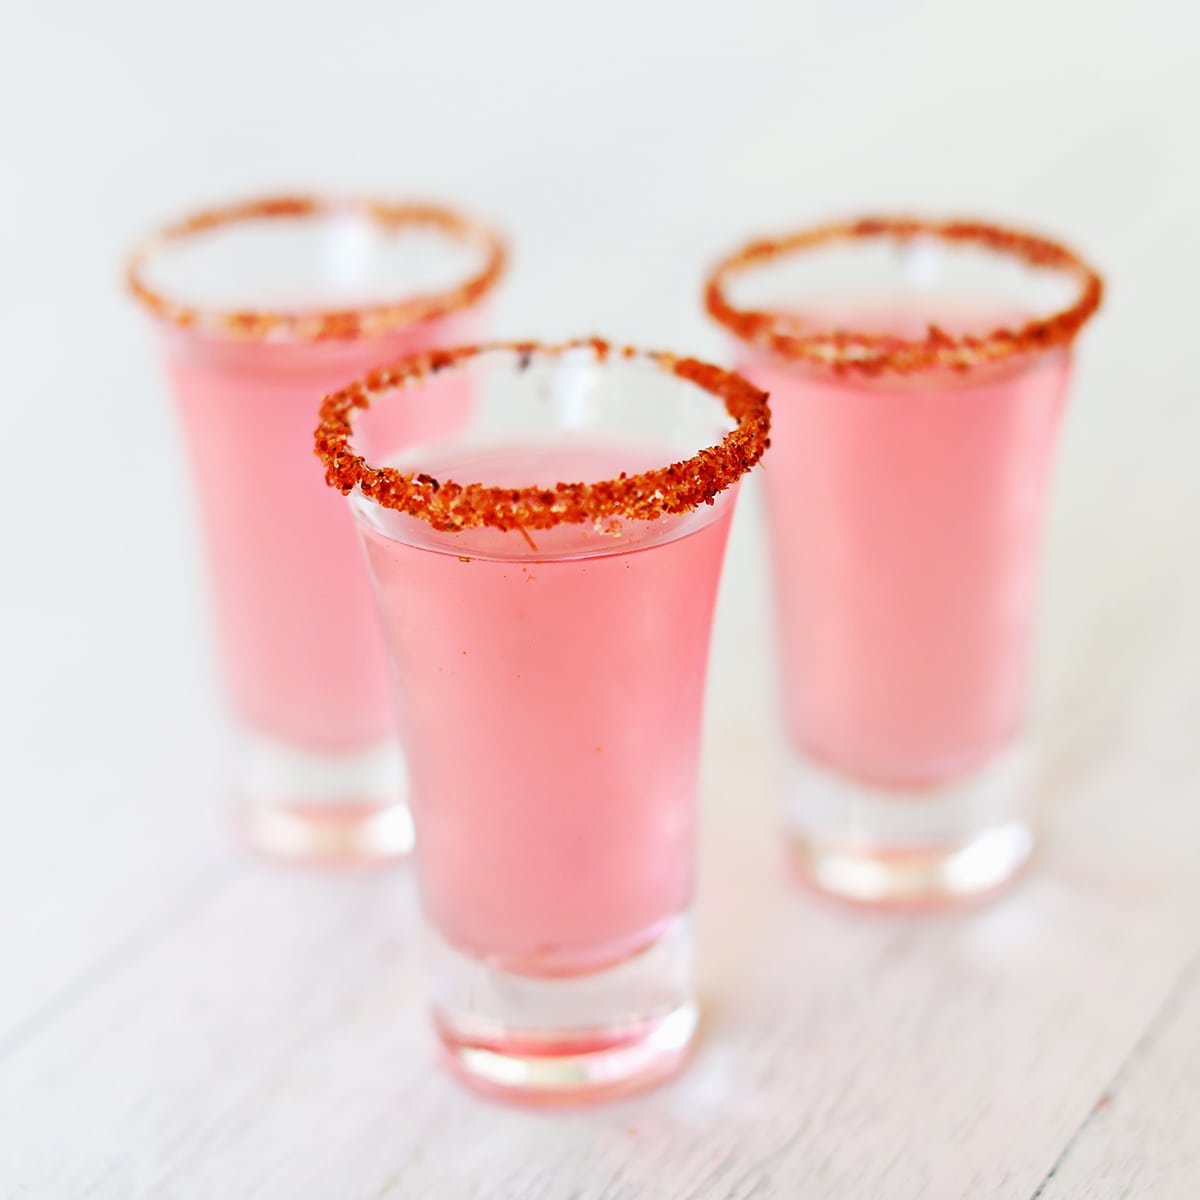 Mexican Candy Shot Recipe. 1 1